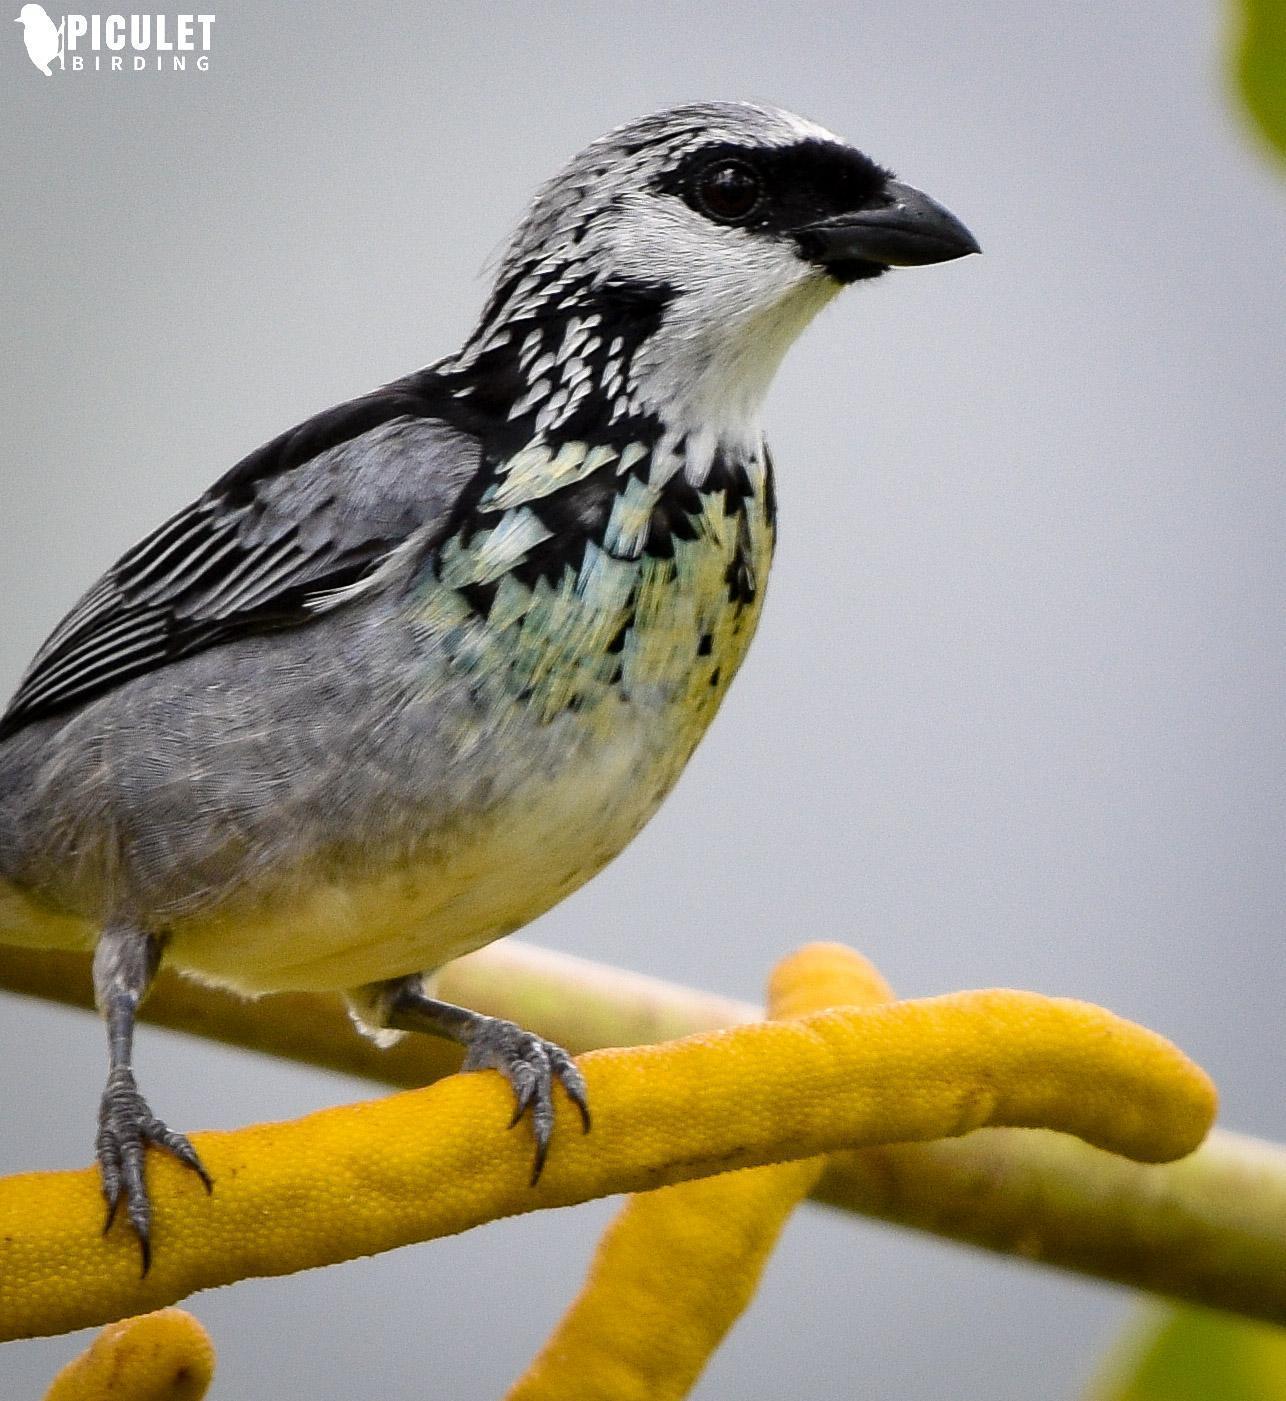 Gray-and-gold Tanager Photo by Julio Delgado